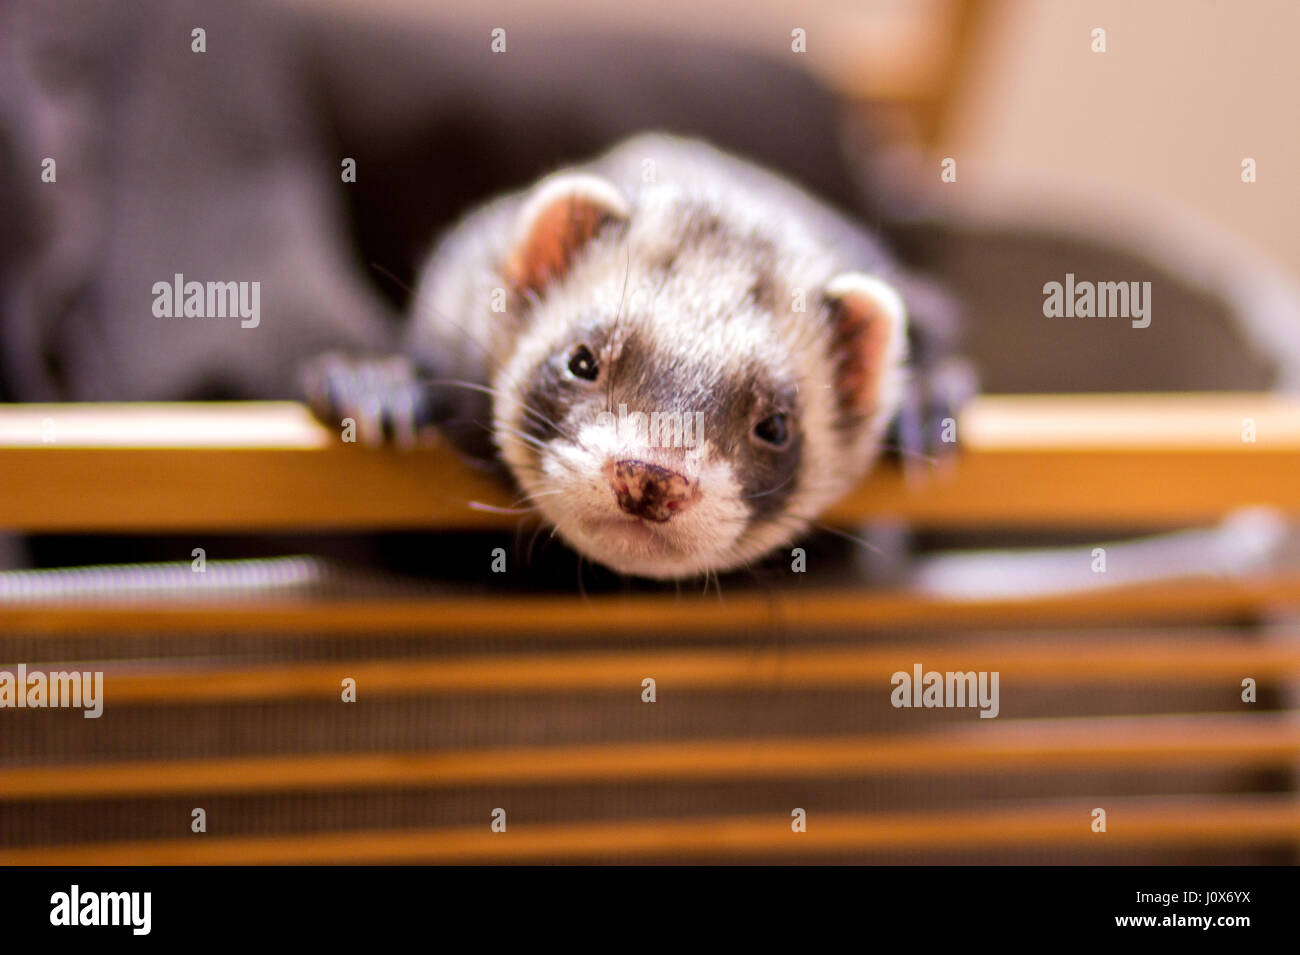 Ferret, Awoken from a Nap Stock Photo